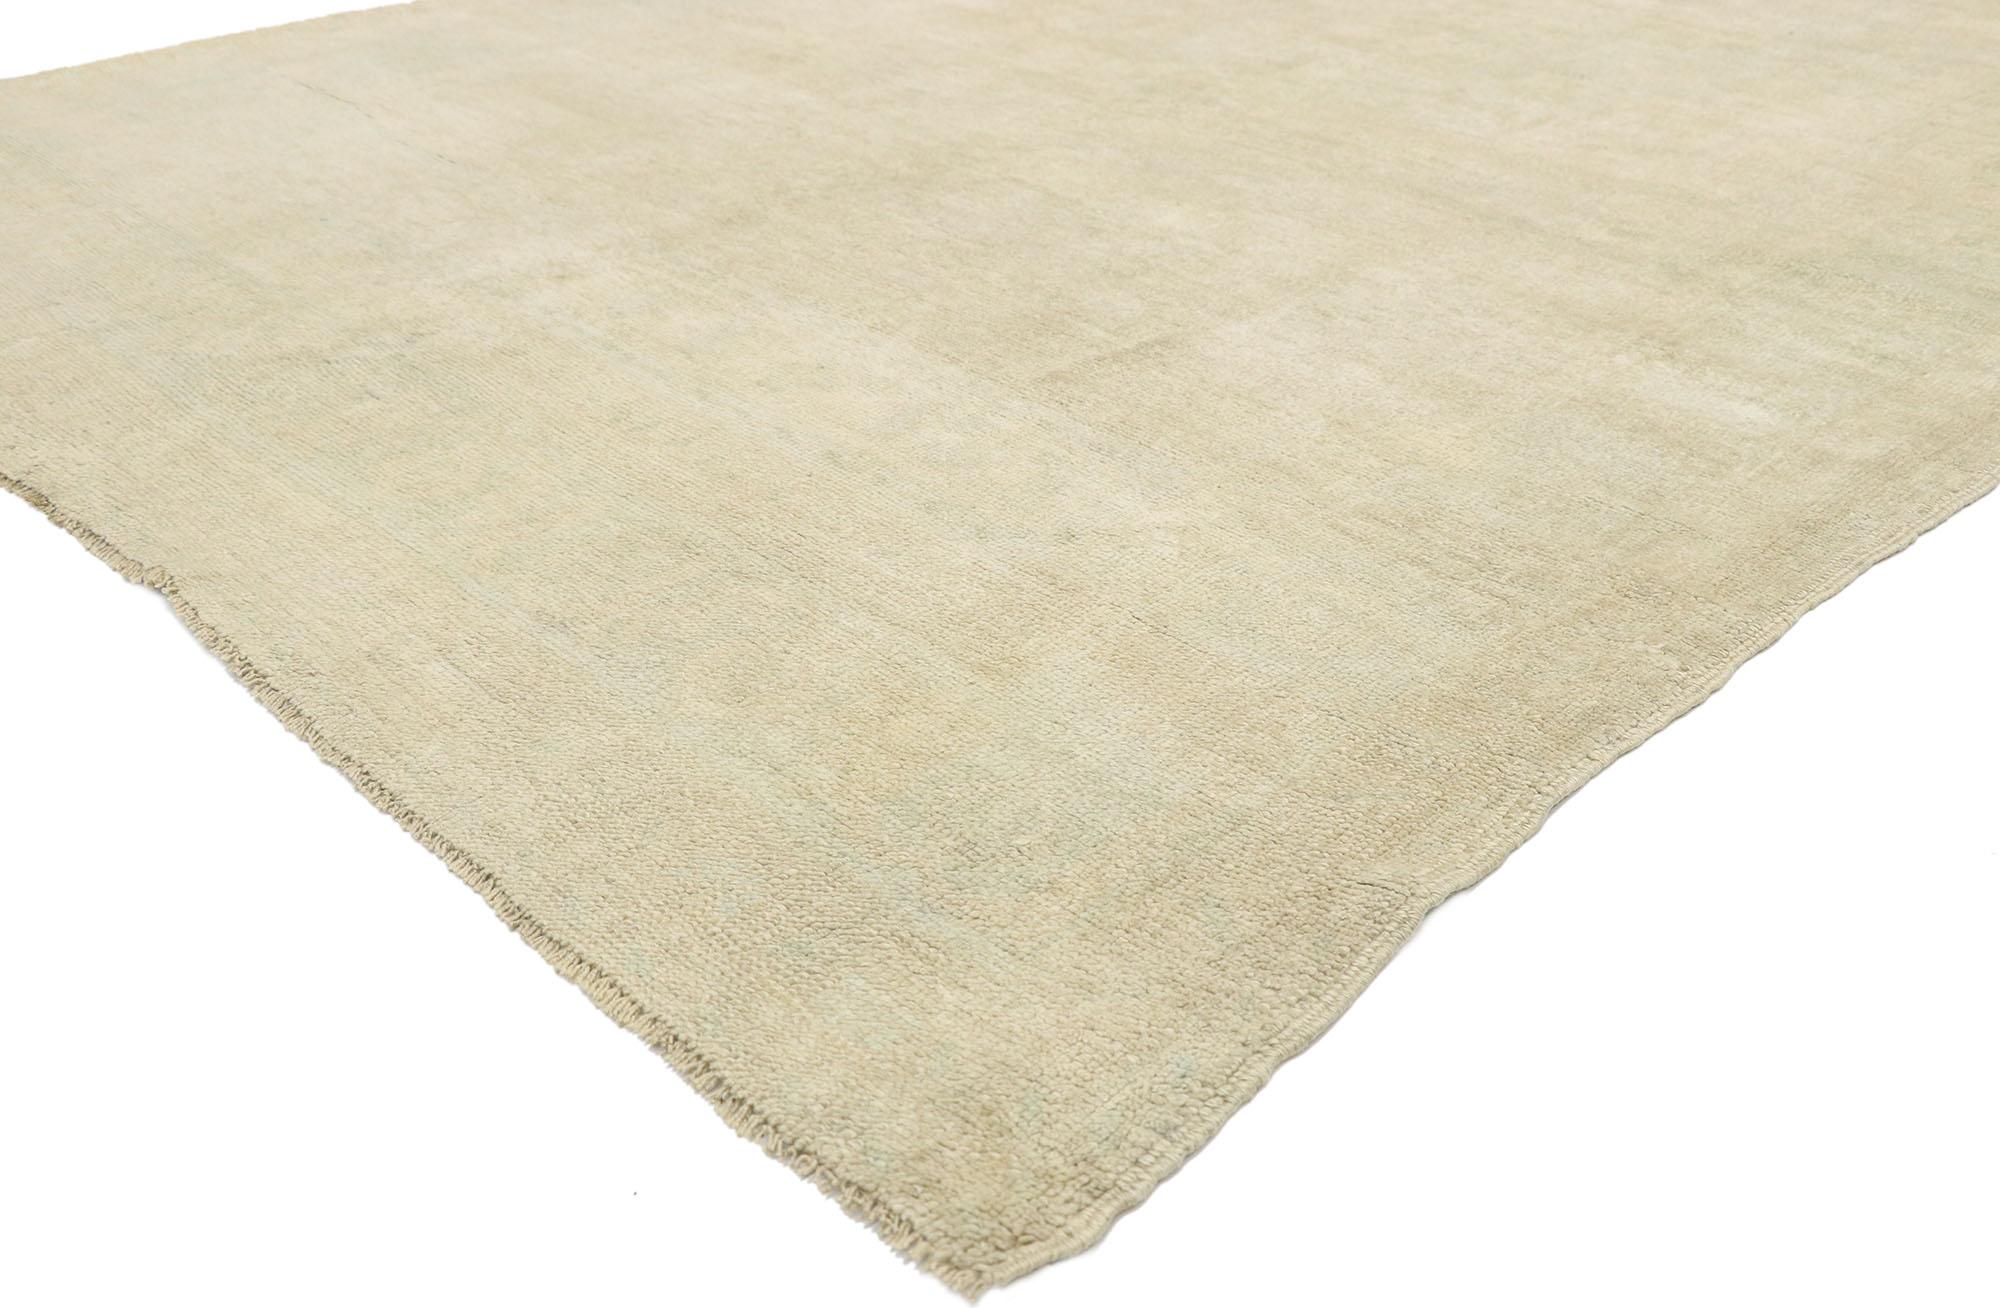 52973 vintage Turkish Oushak Gallery rug with Muted Hues and Monochromatic Mission Style 05'08 x 11'03. Warm and inviting combined with the right amount of architectural design elements, this vintage Oushak gallery rug charms with ease and